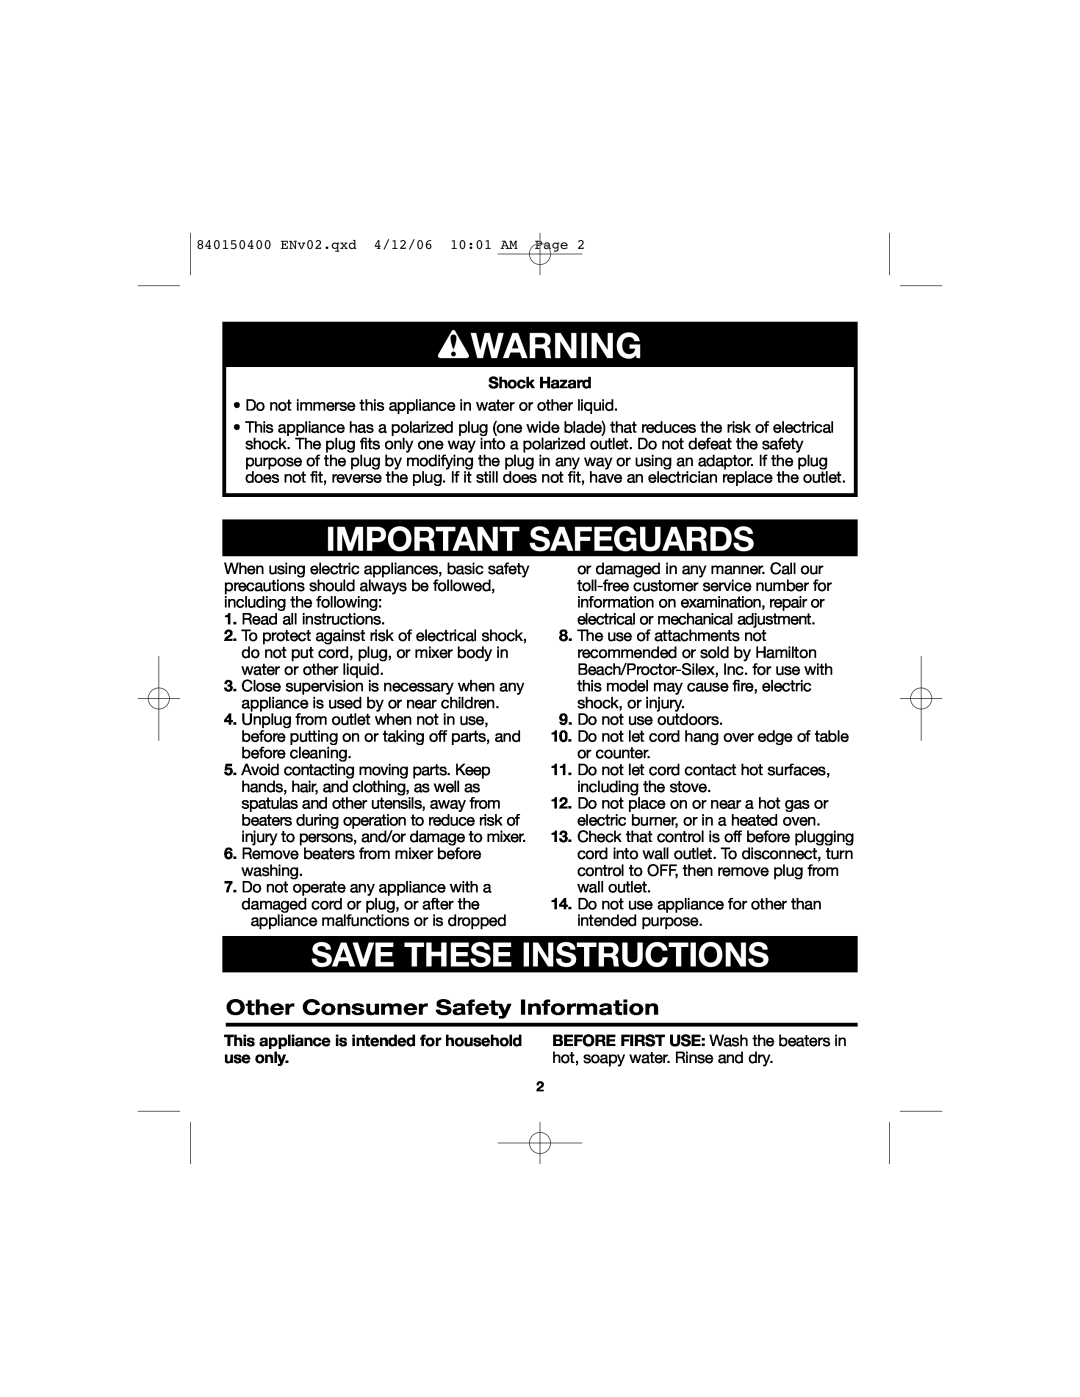 Hamilton Beach 62588, 62515R wWARNING, Important Safeguards, Save These Instructions, Other Consumer Safety Information 